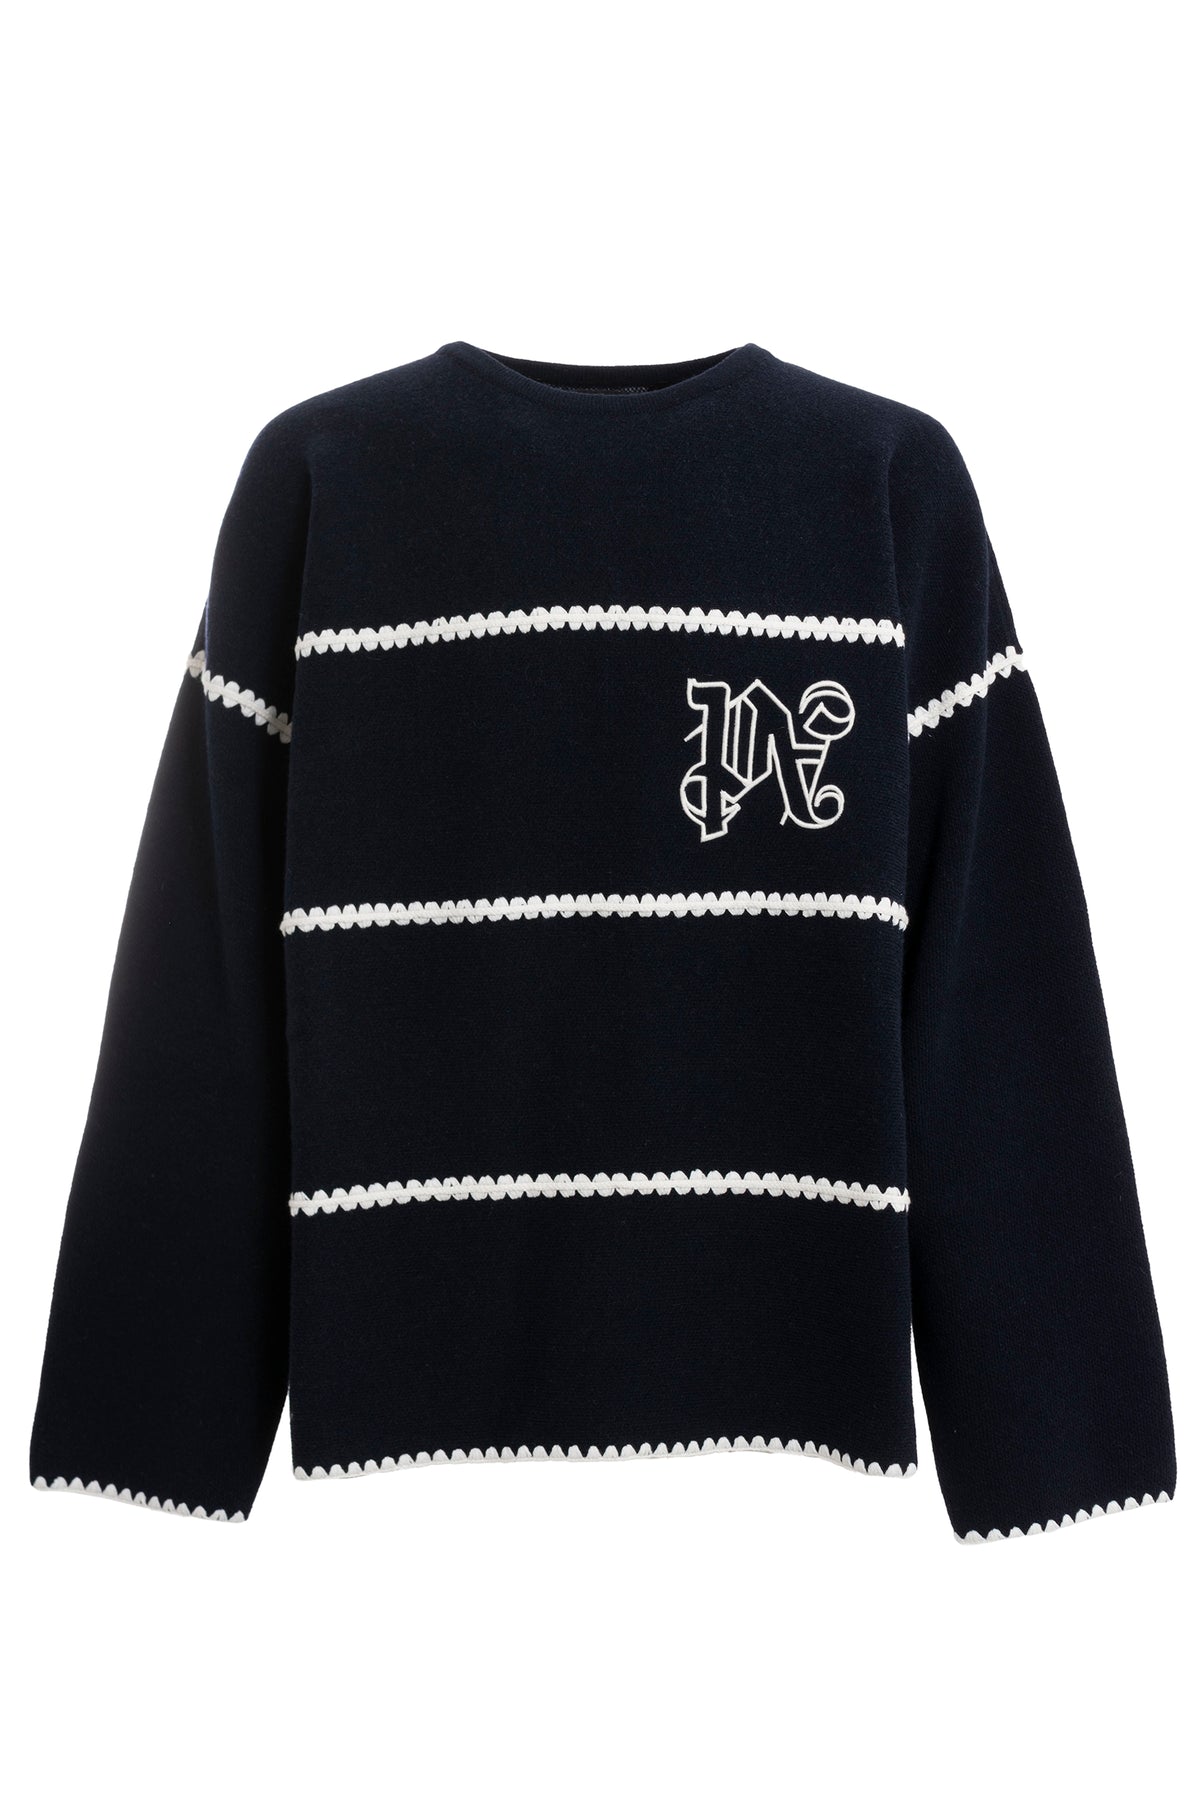 PA MONOGRAM STRIPED SWEATER / NAVY BLUE OFFWHT